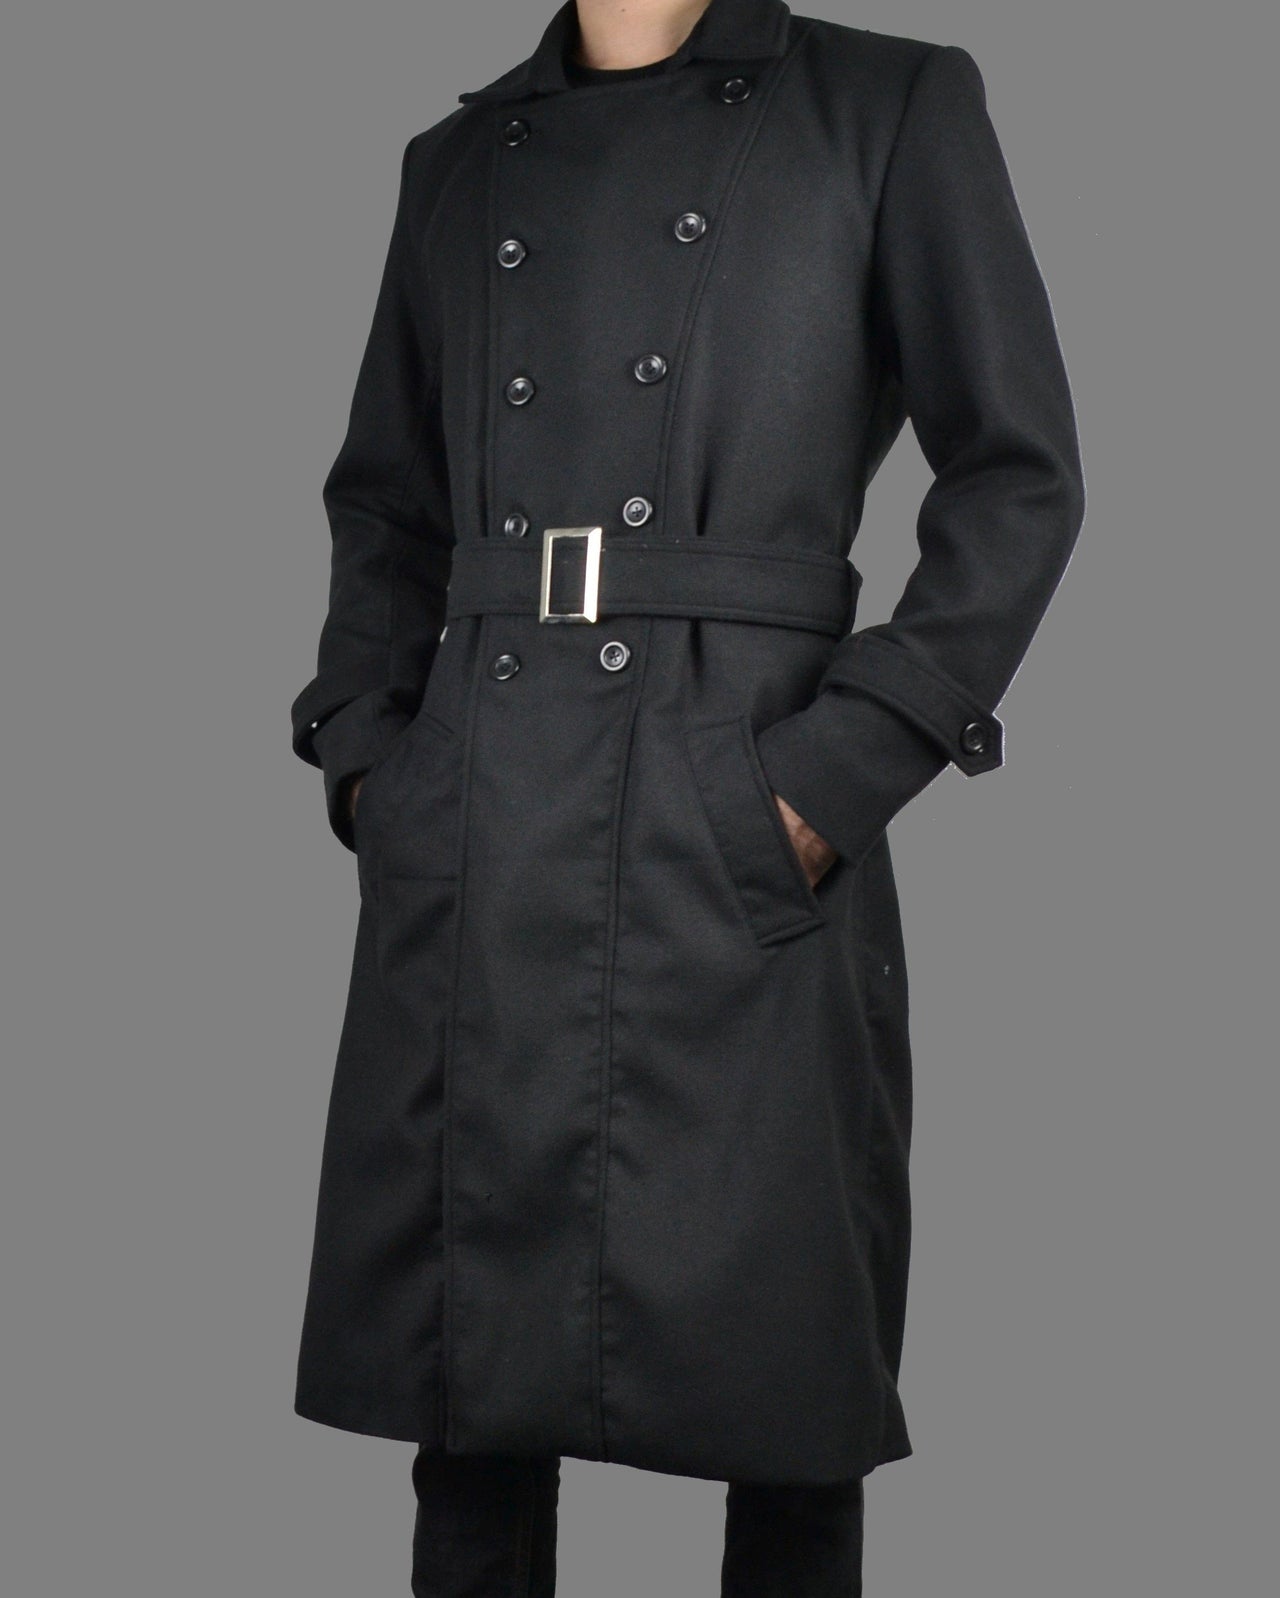 Mens Double Breasted Classic Wool Long Coat